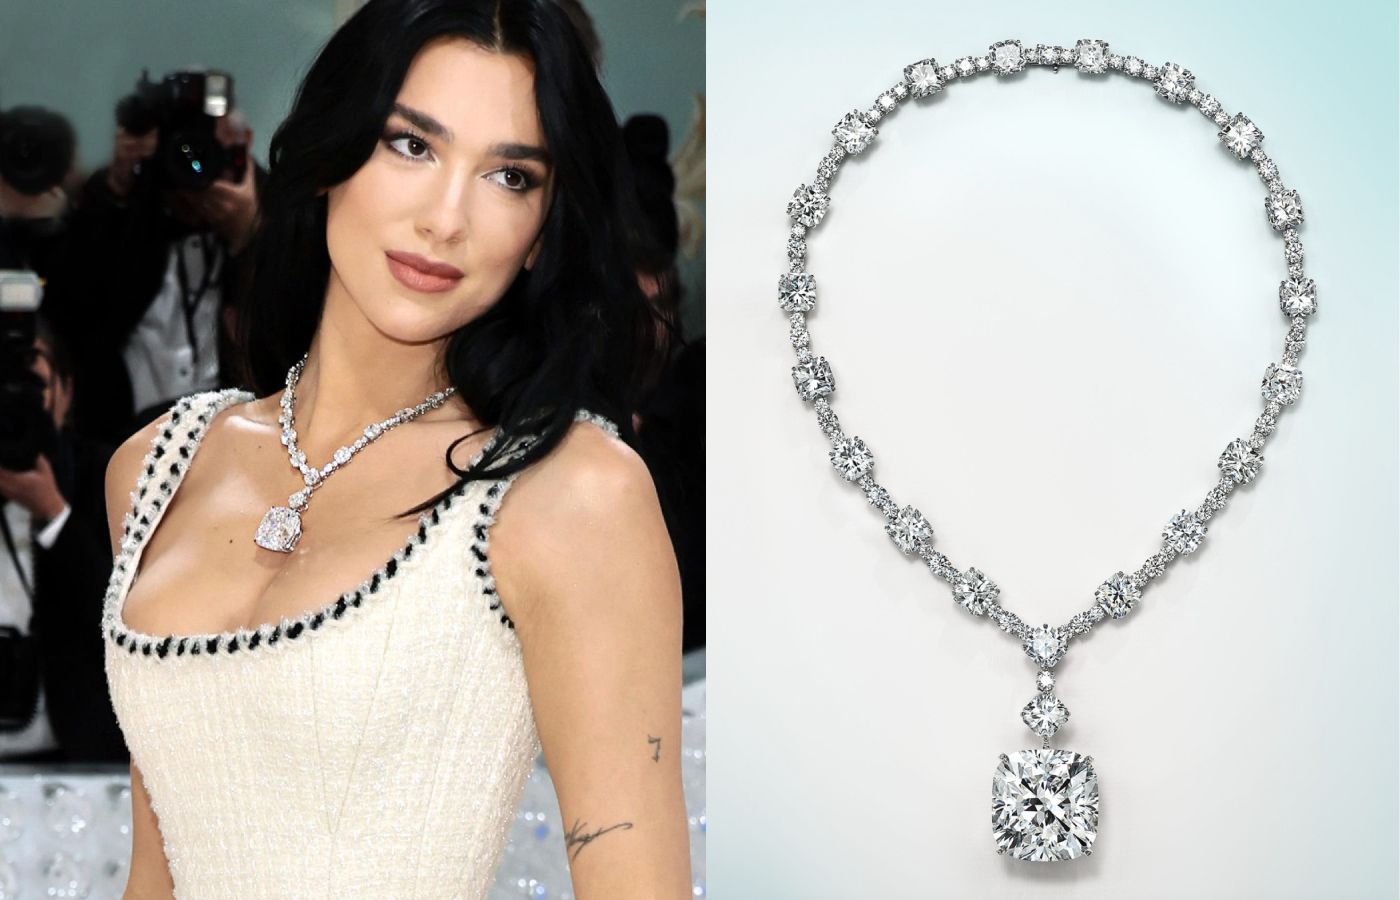 MET Gala attendee Dua Lipa wearing a white gold and diamond necklace by Tiffany & Co. featuring 200-cts of diamonds 